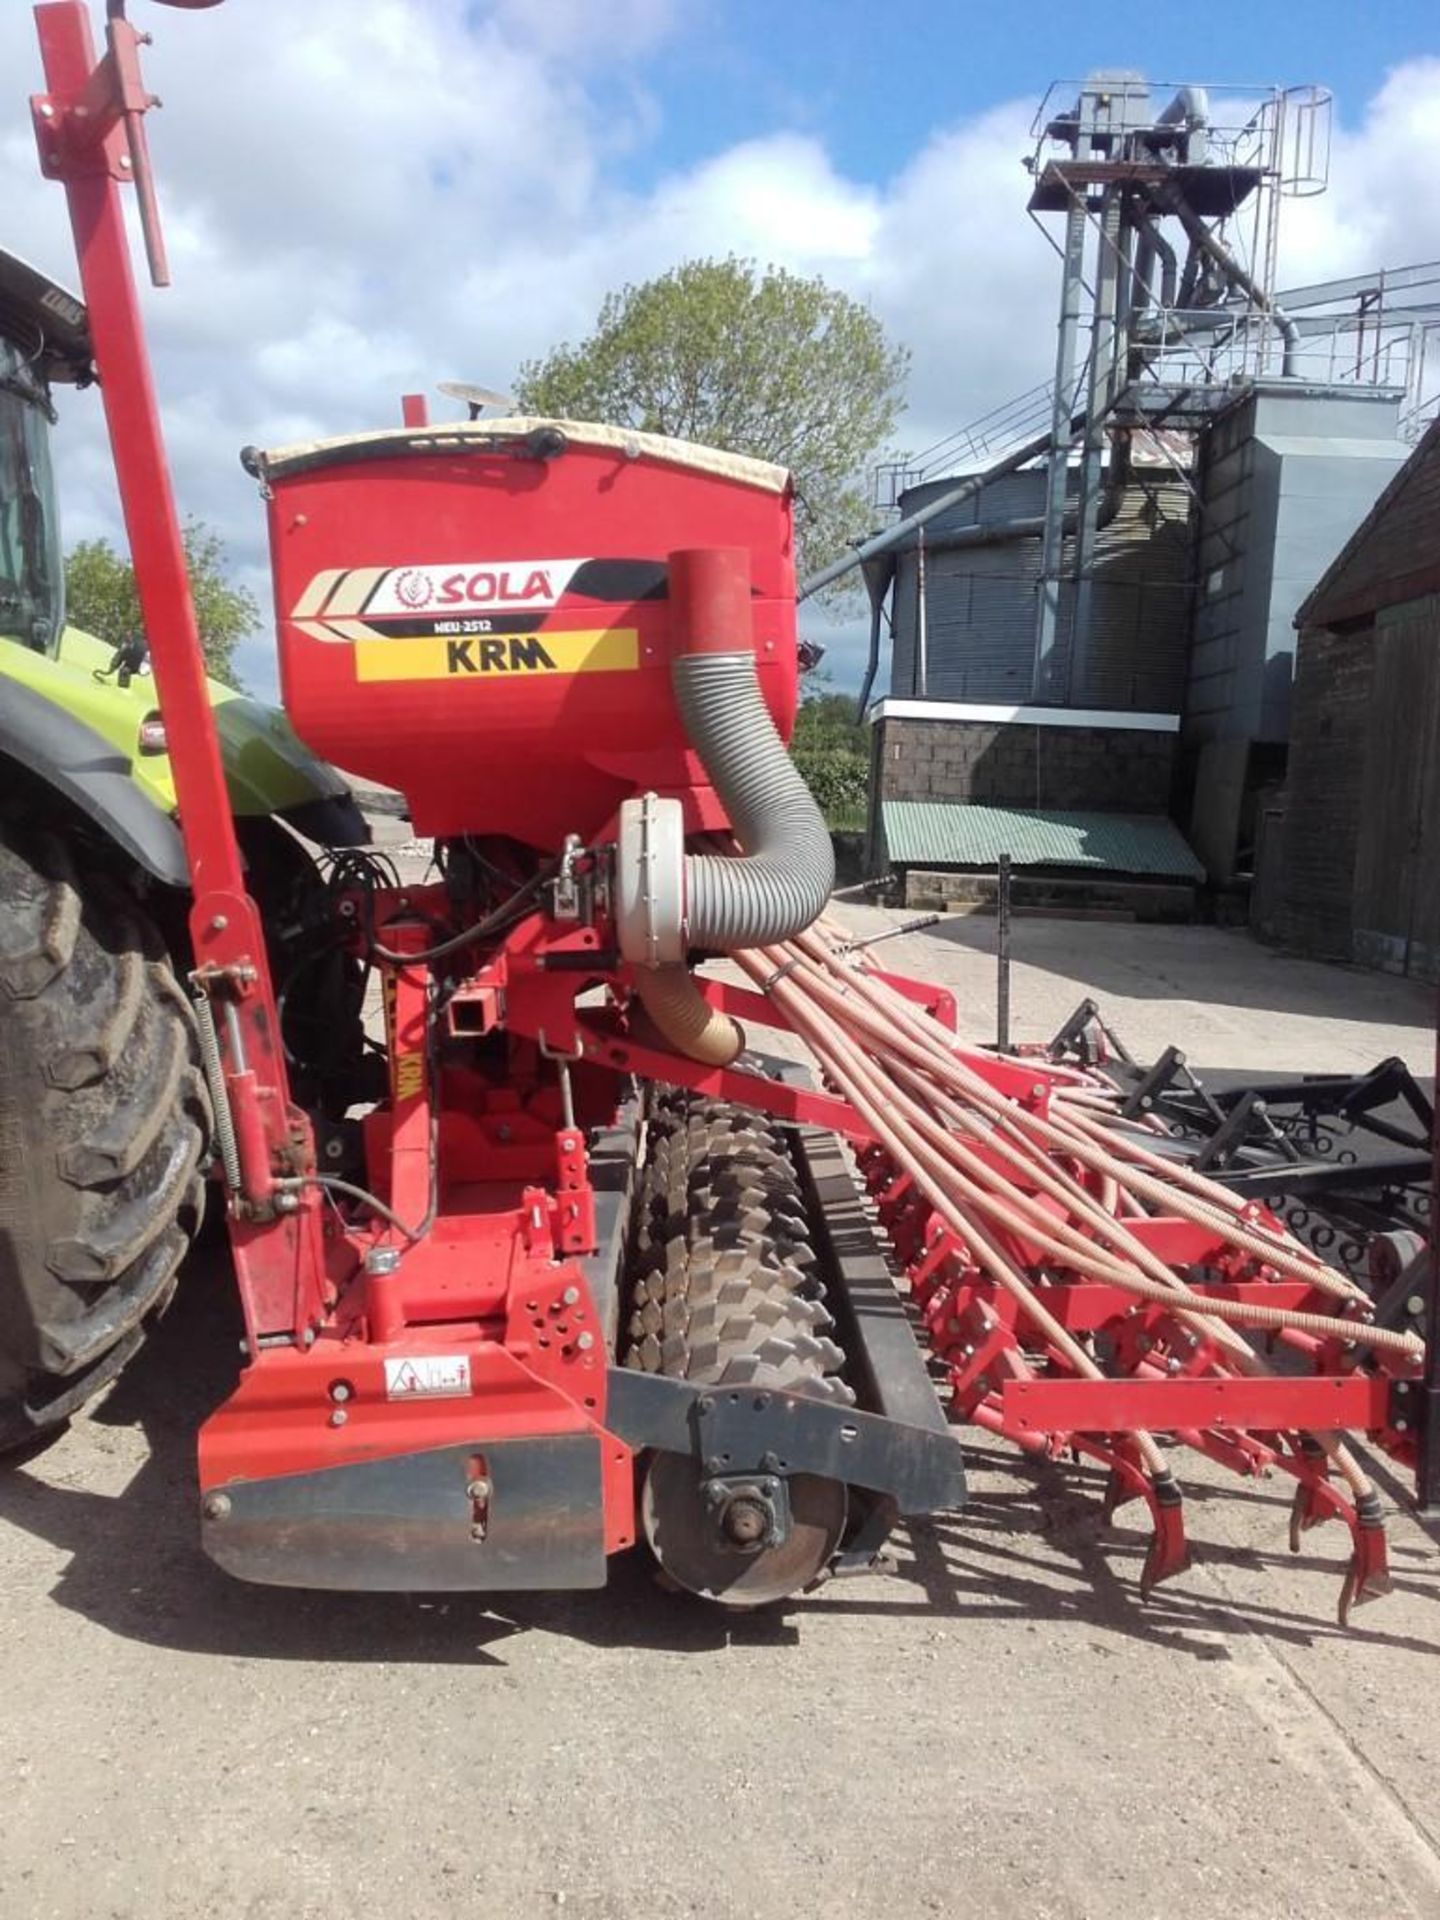 KRM NEU 2512 Soladrill Combination with 4m Falc Magnum Power Harrow - Image 2 of 4